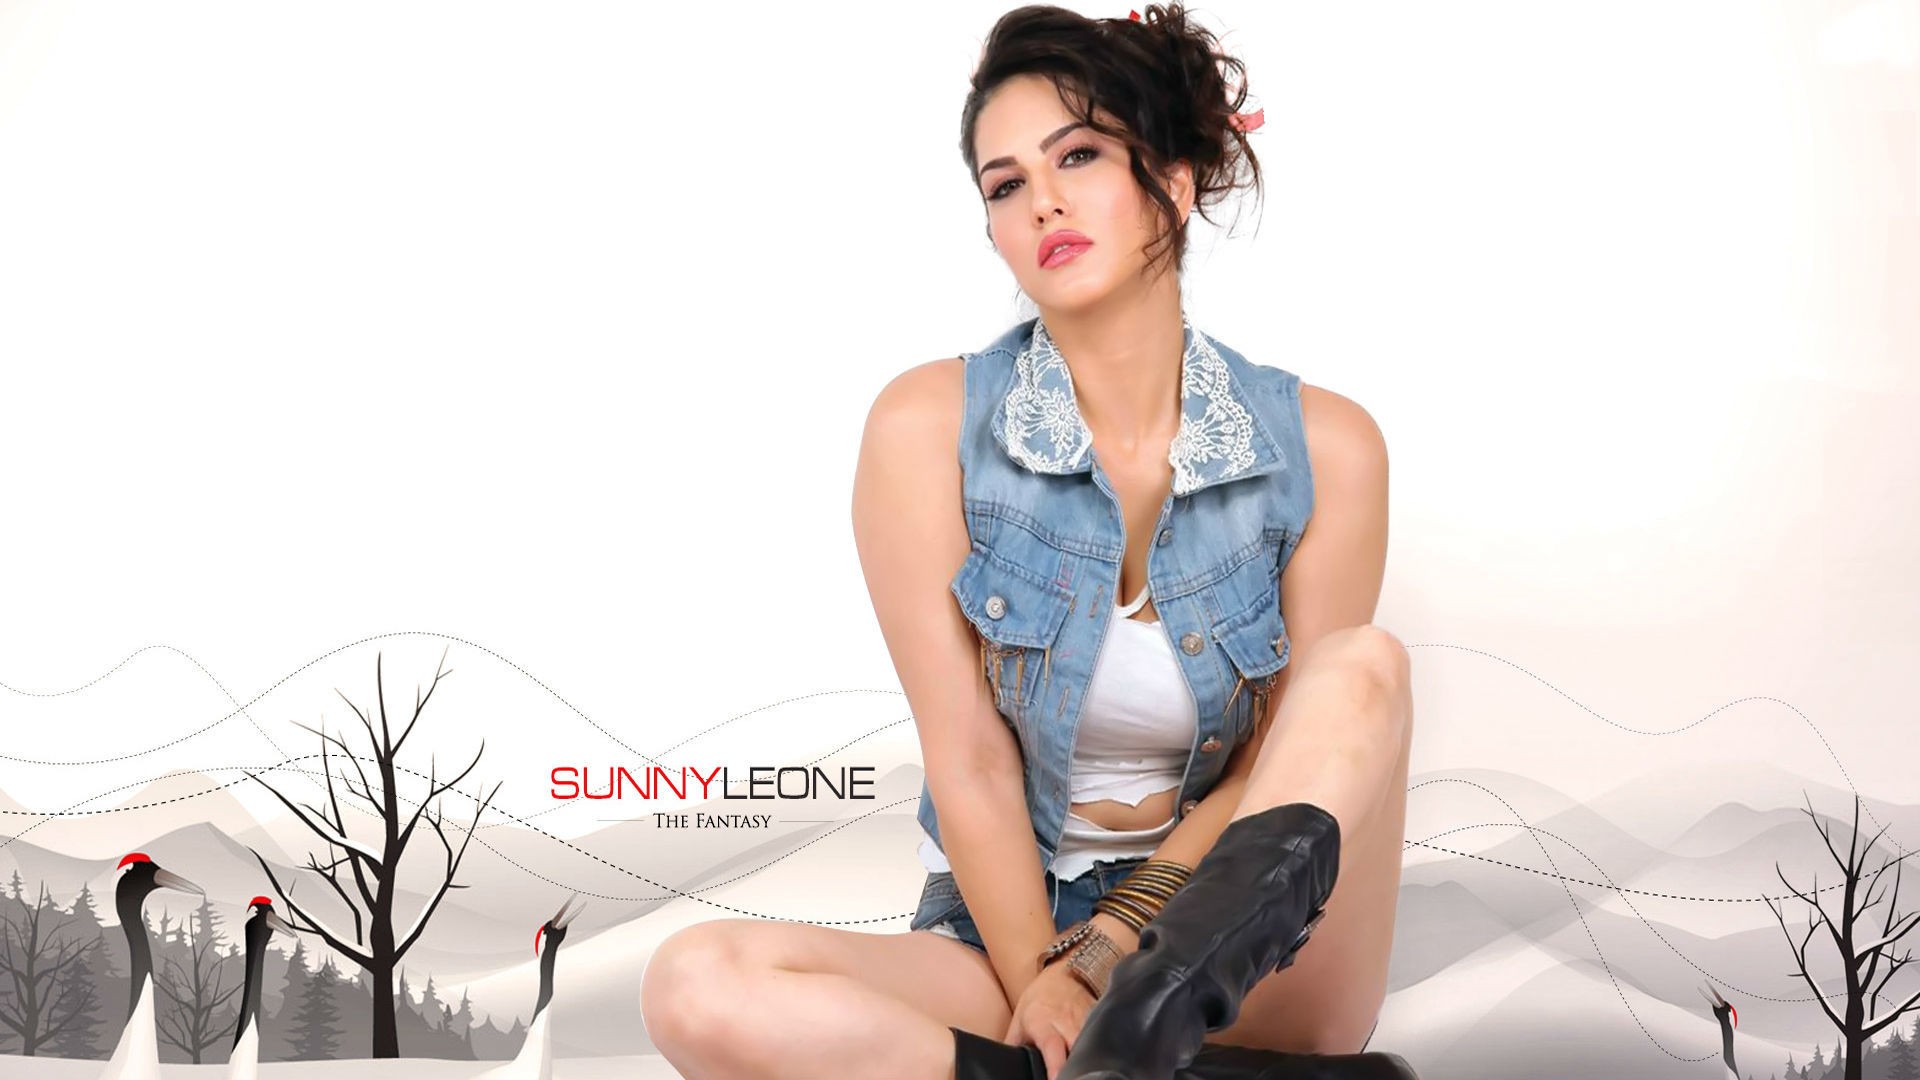 Sunny Leone HD Images HD Wallpapers Backgrounds Images 1920x1080. 